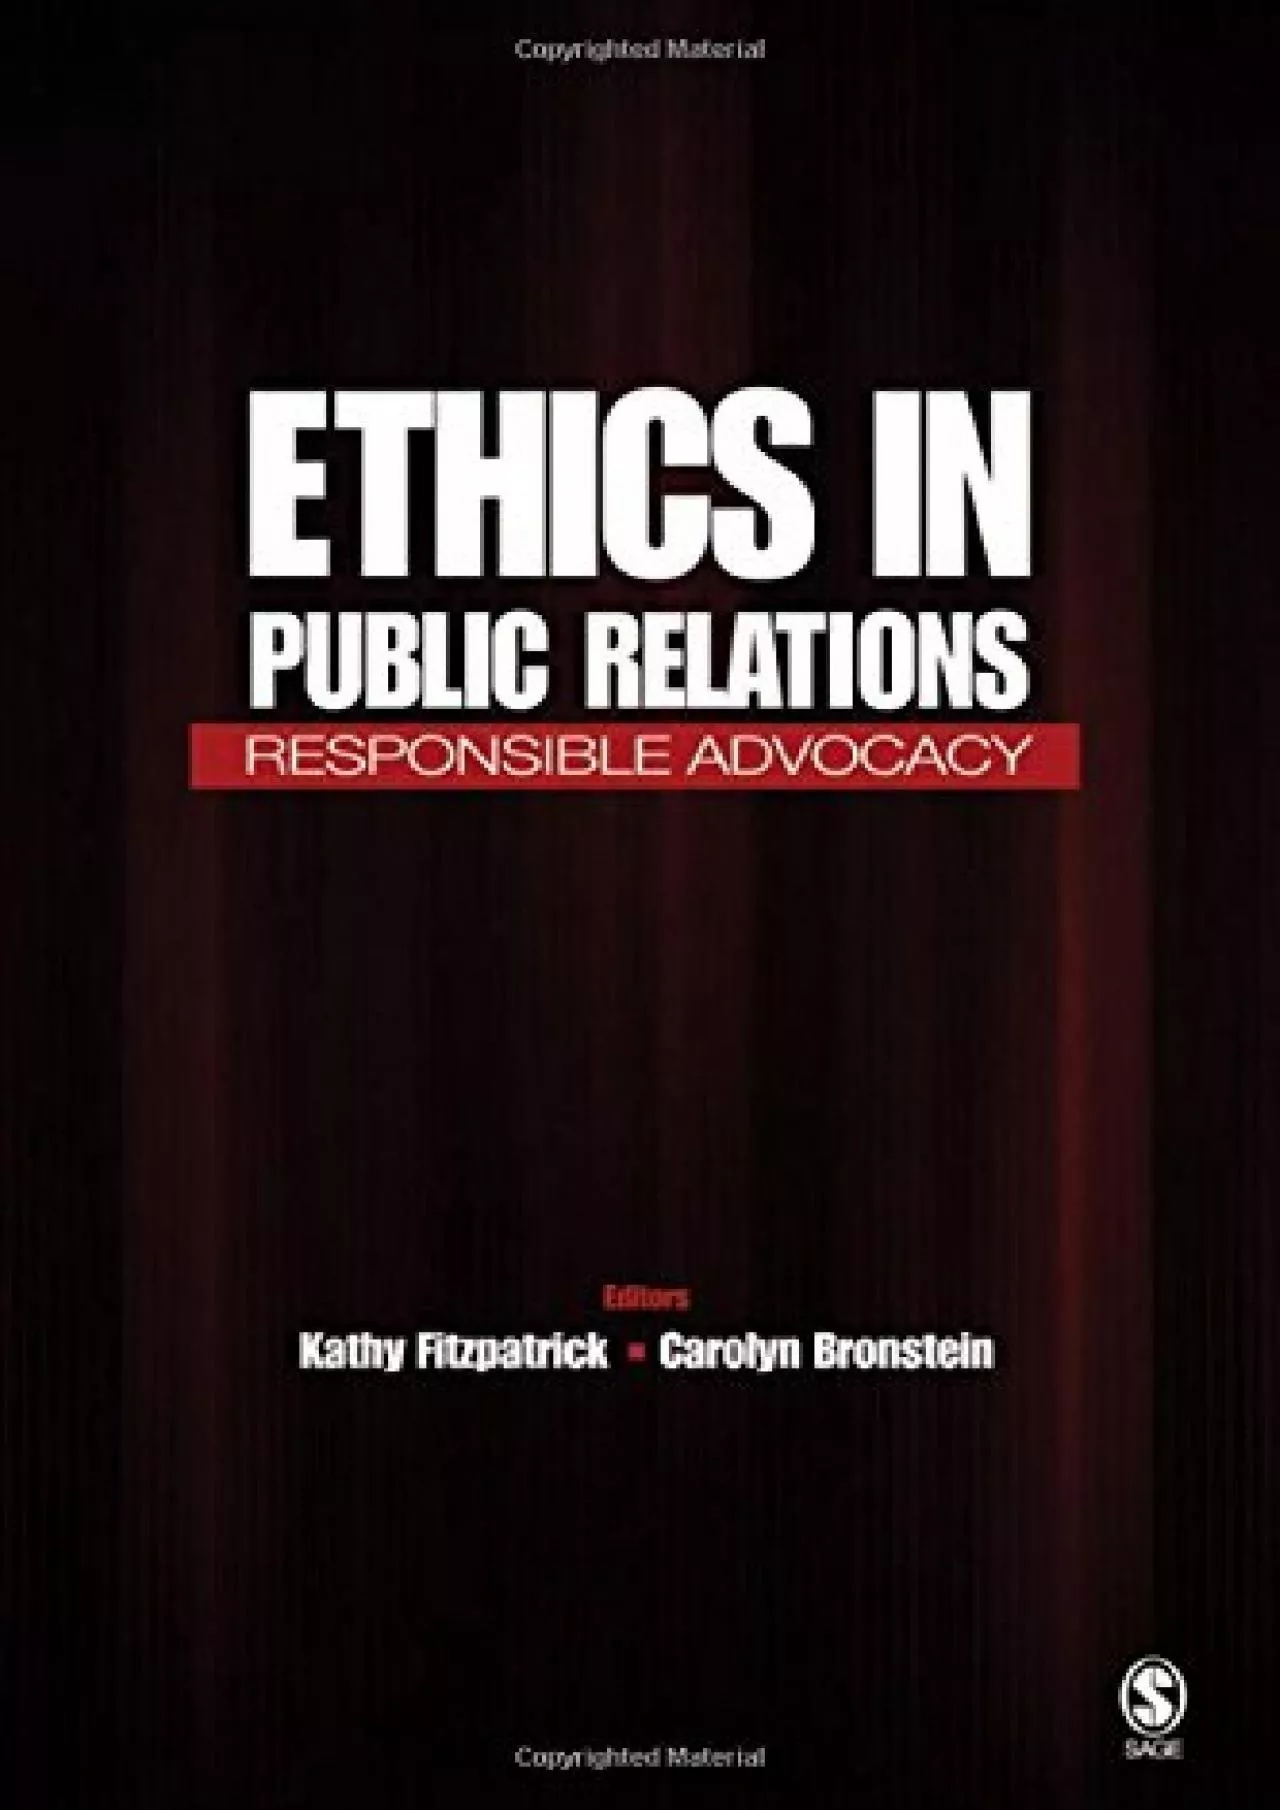 (BOOK)-Ethics in Public Relations: Responsible Advocacy